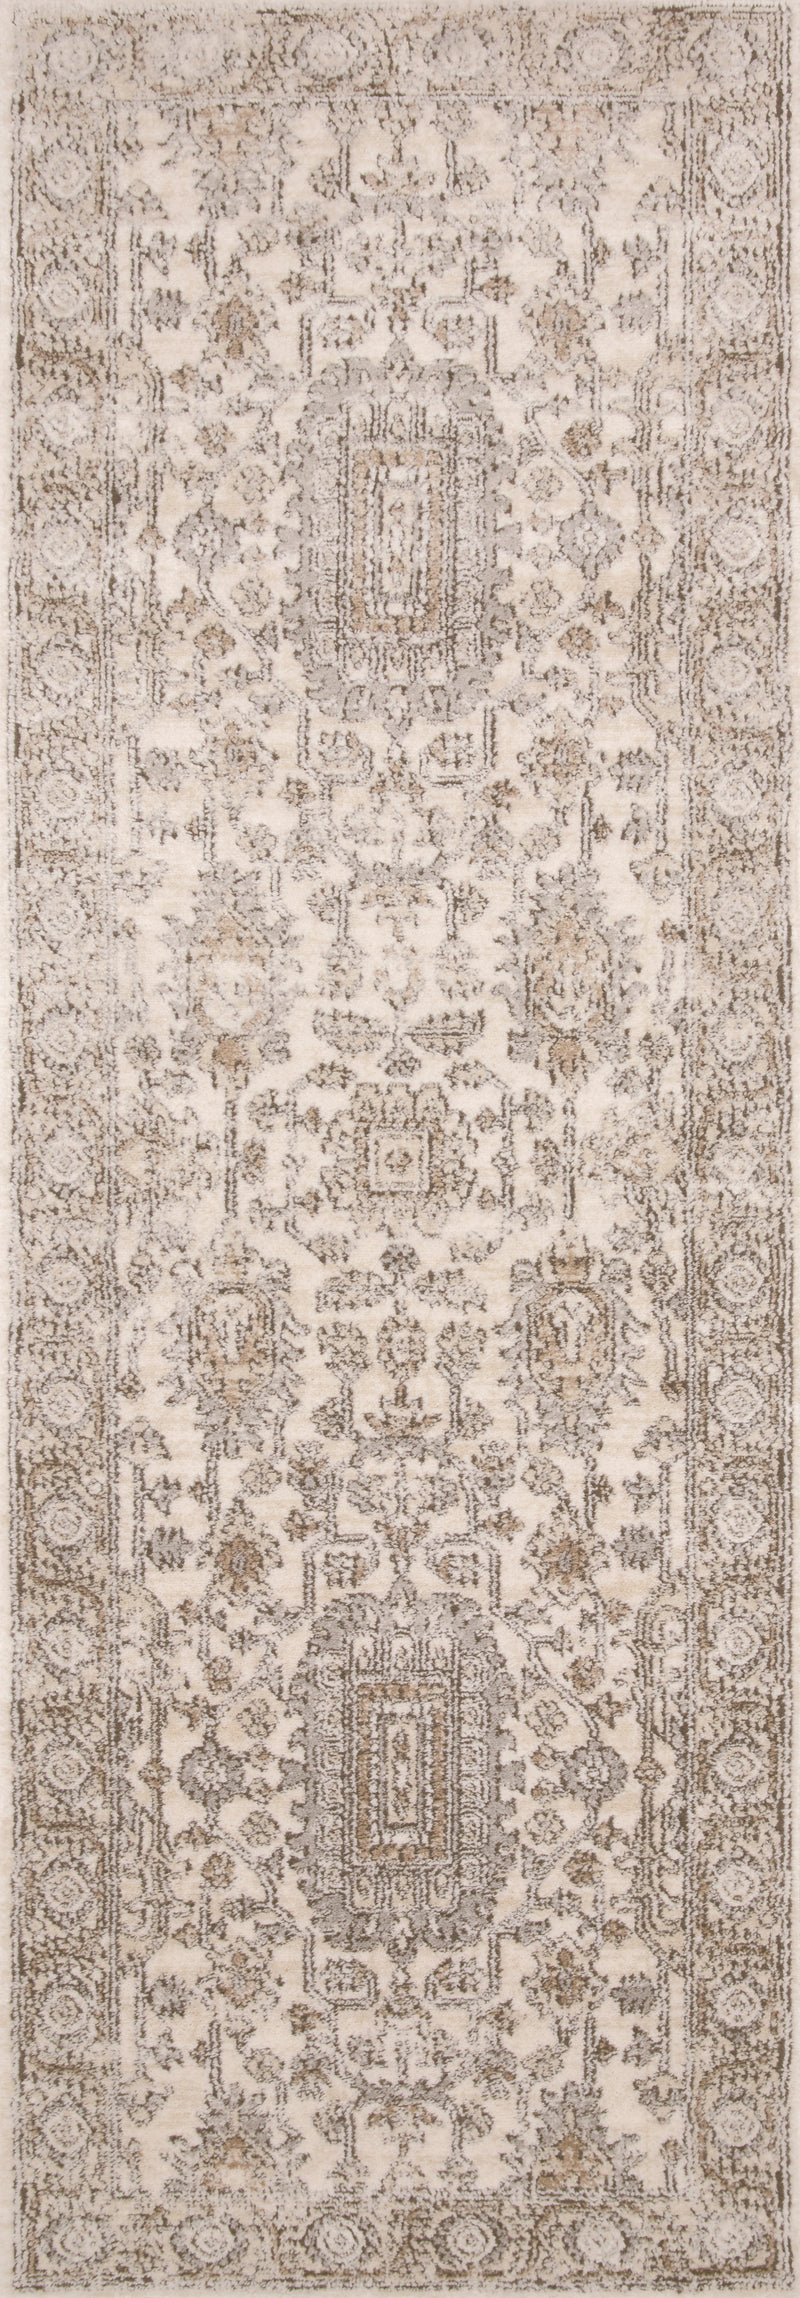 media image for Teagan Rug in Ivory / Sand by Loloi II 240